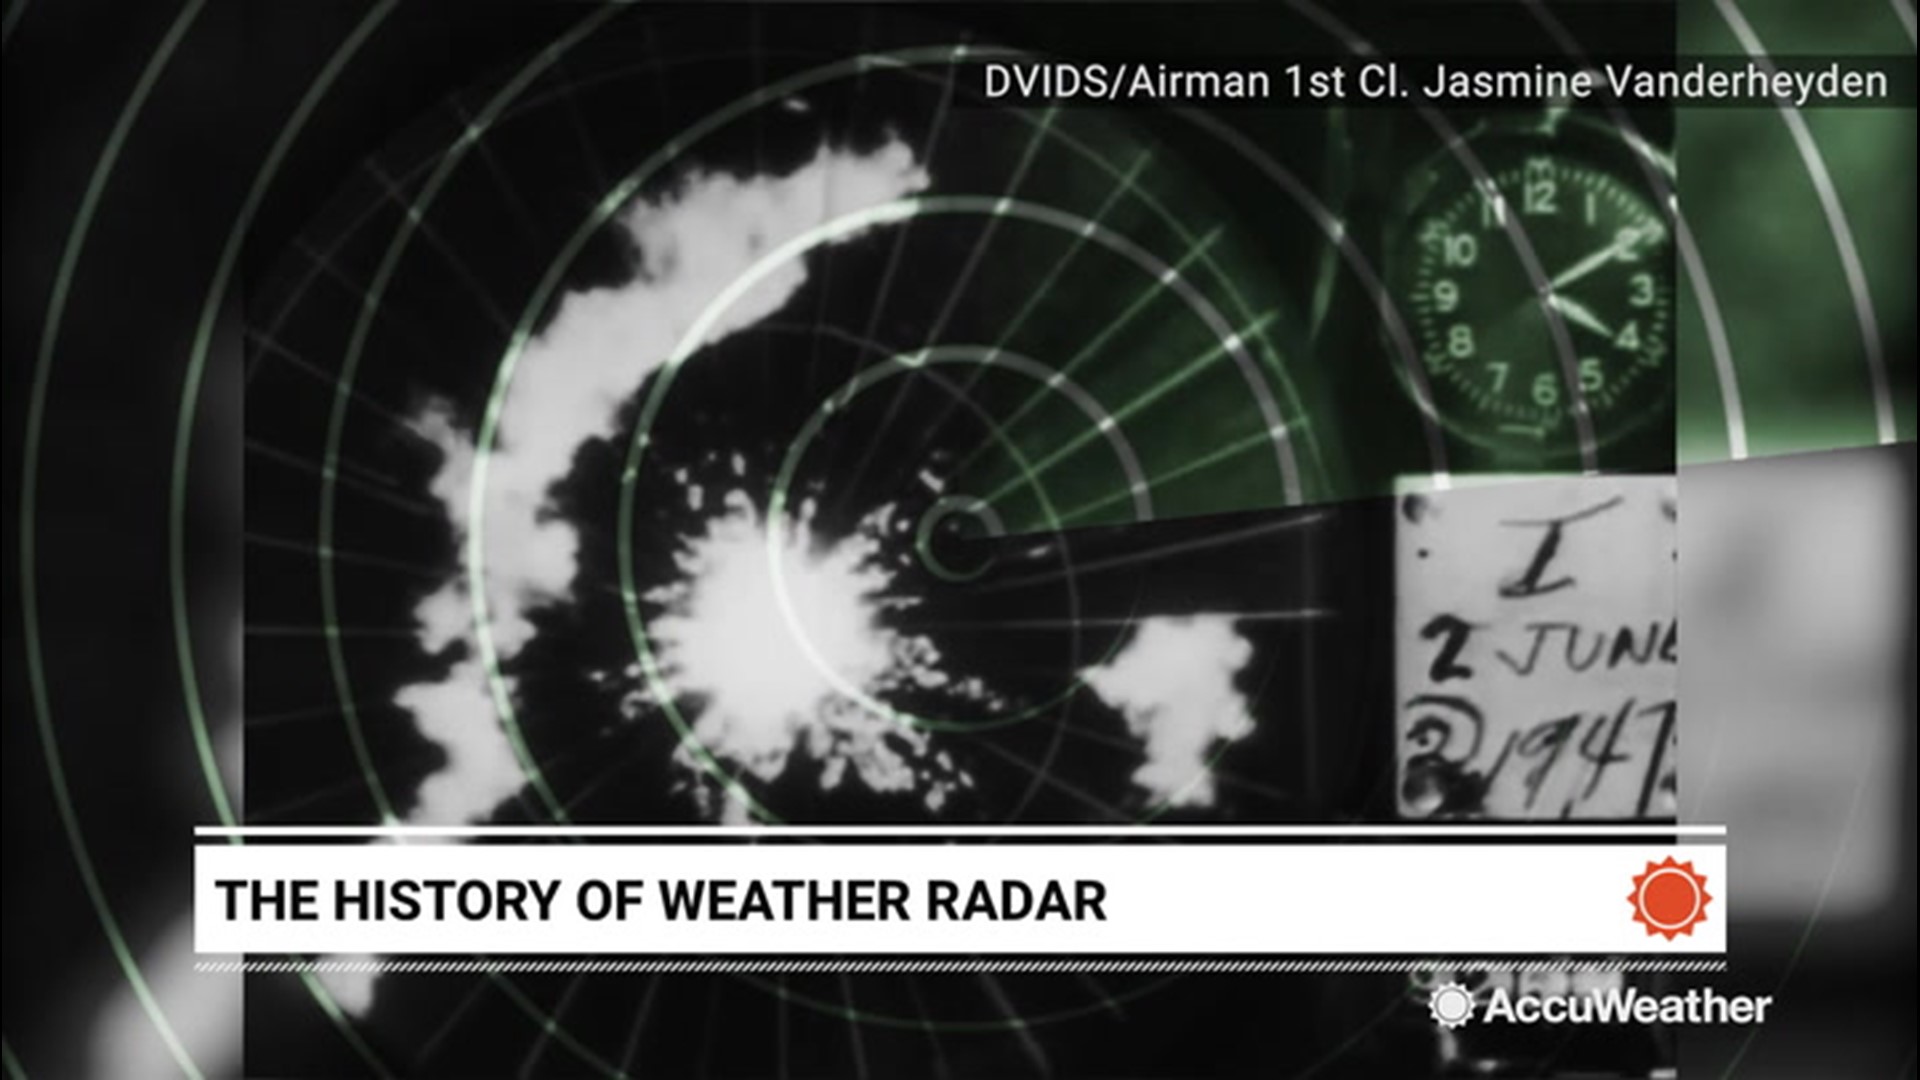 Today's weather forecasts rely on some of the most advanced satellite and radar systems in the world. But it wasn't always used to detect weather. Here's a look back at the history of radar and its eventual use for it.